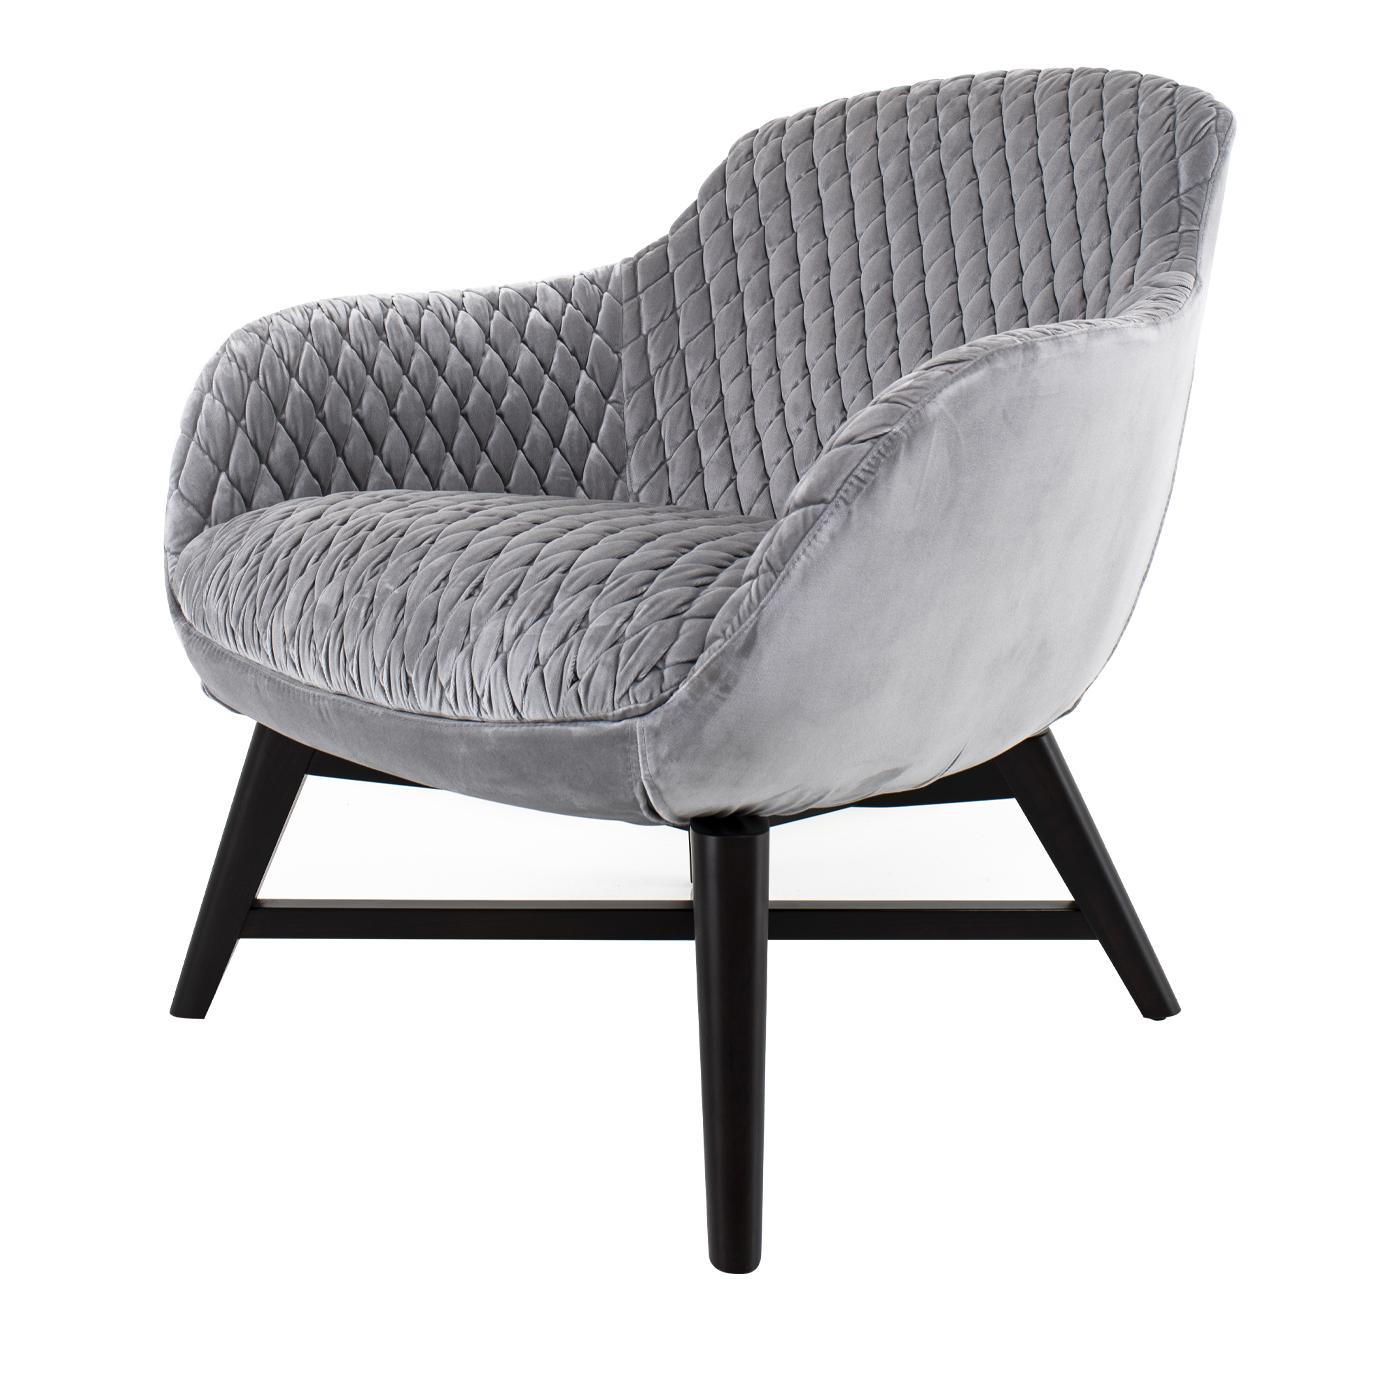 Sit back and relax on the extra-comfortable Miley armchair. Tradition and innovation come together in this 100% artisan piece of furniture made of grey nubuck leather and woven fabric and combined with a black lacquered open pore ash wood base. This